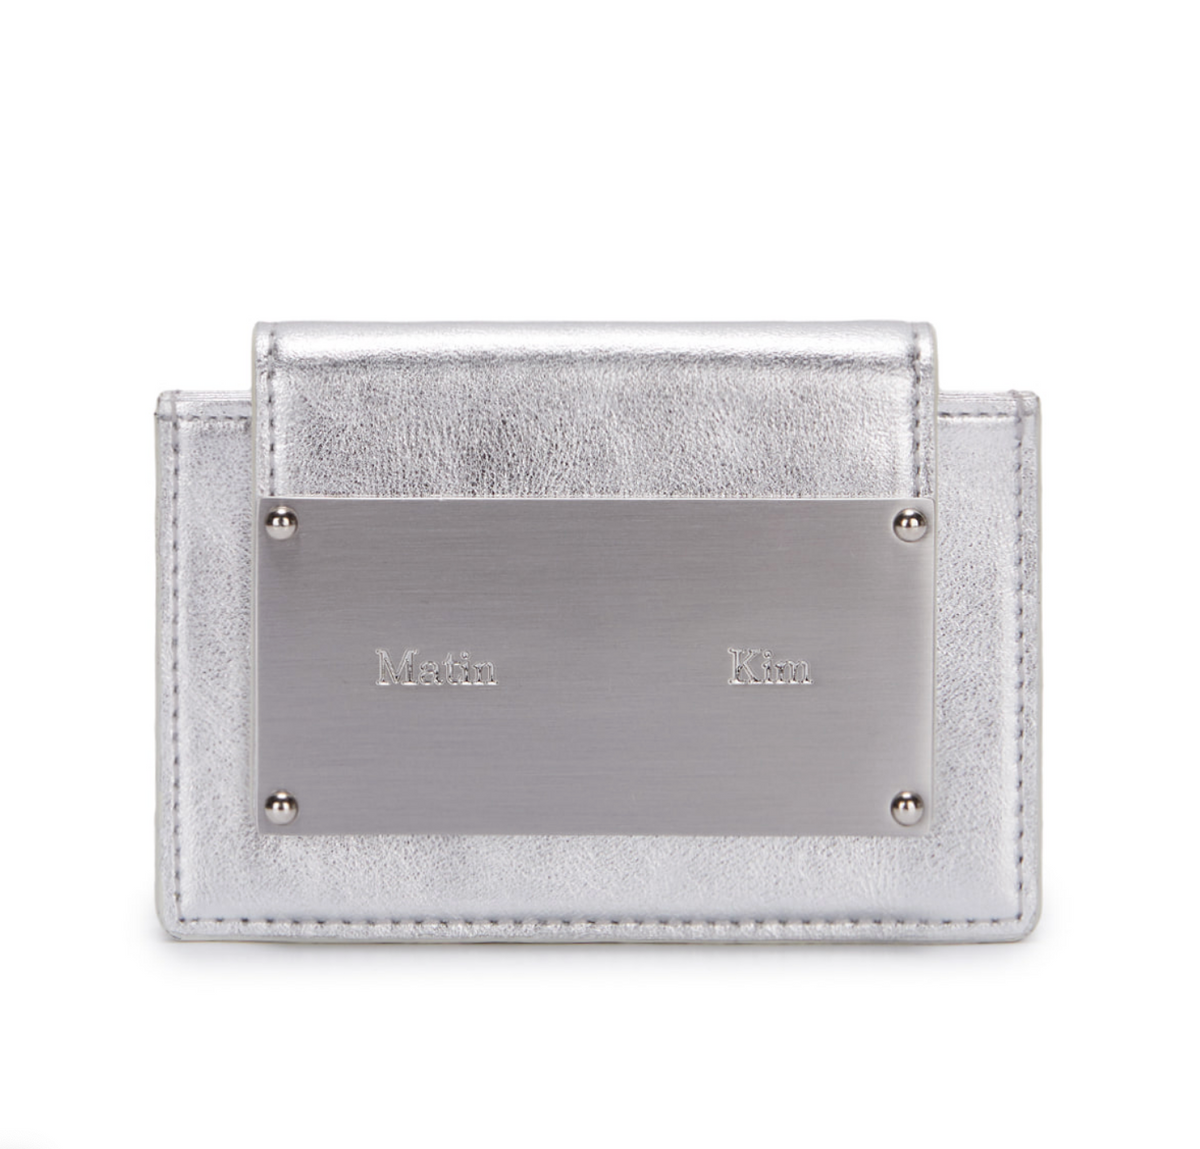 Matin Kim] ACCORDION WALLET IN SILVER – Ohue